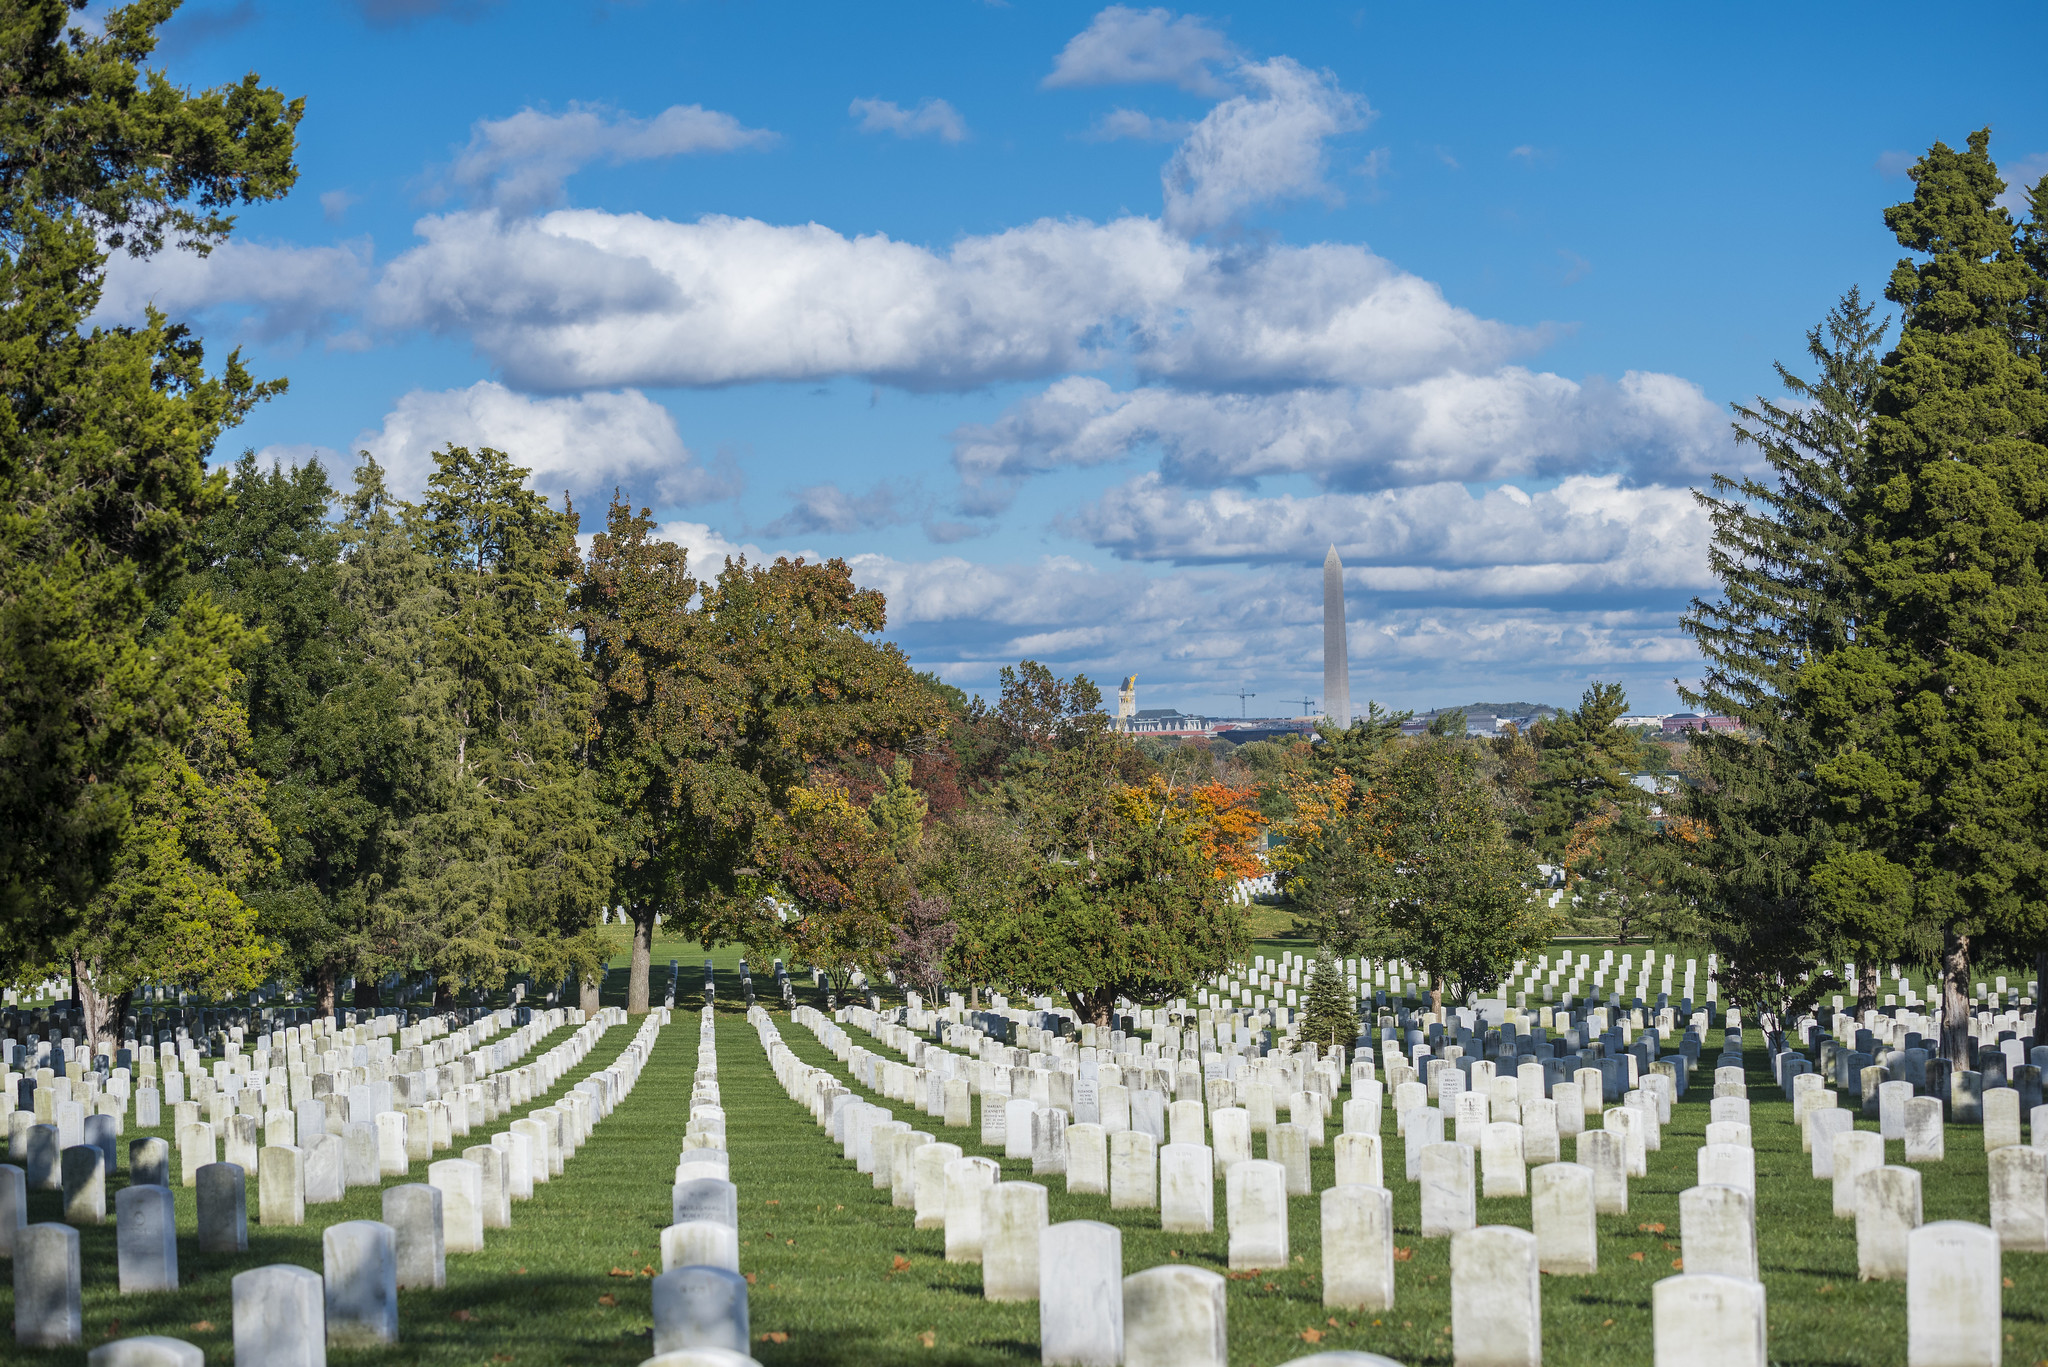 Rows of white gravestones at Arlington National Cemetery, with views of the Washington Monument in the distance